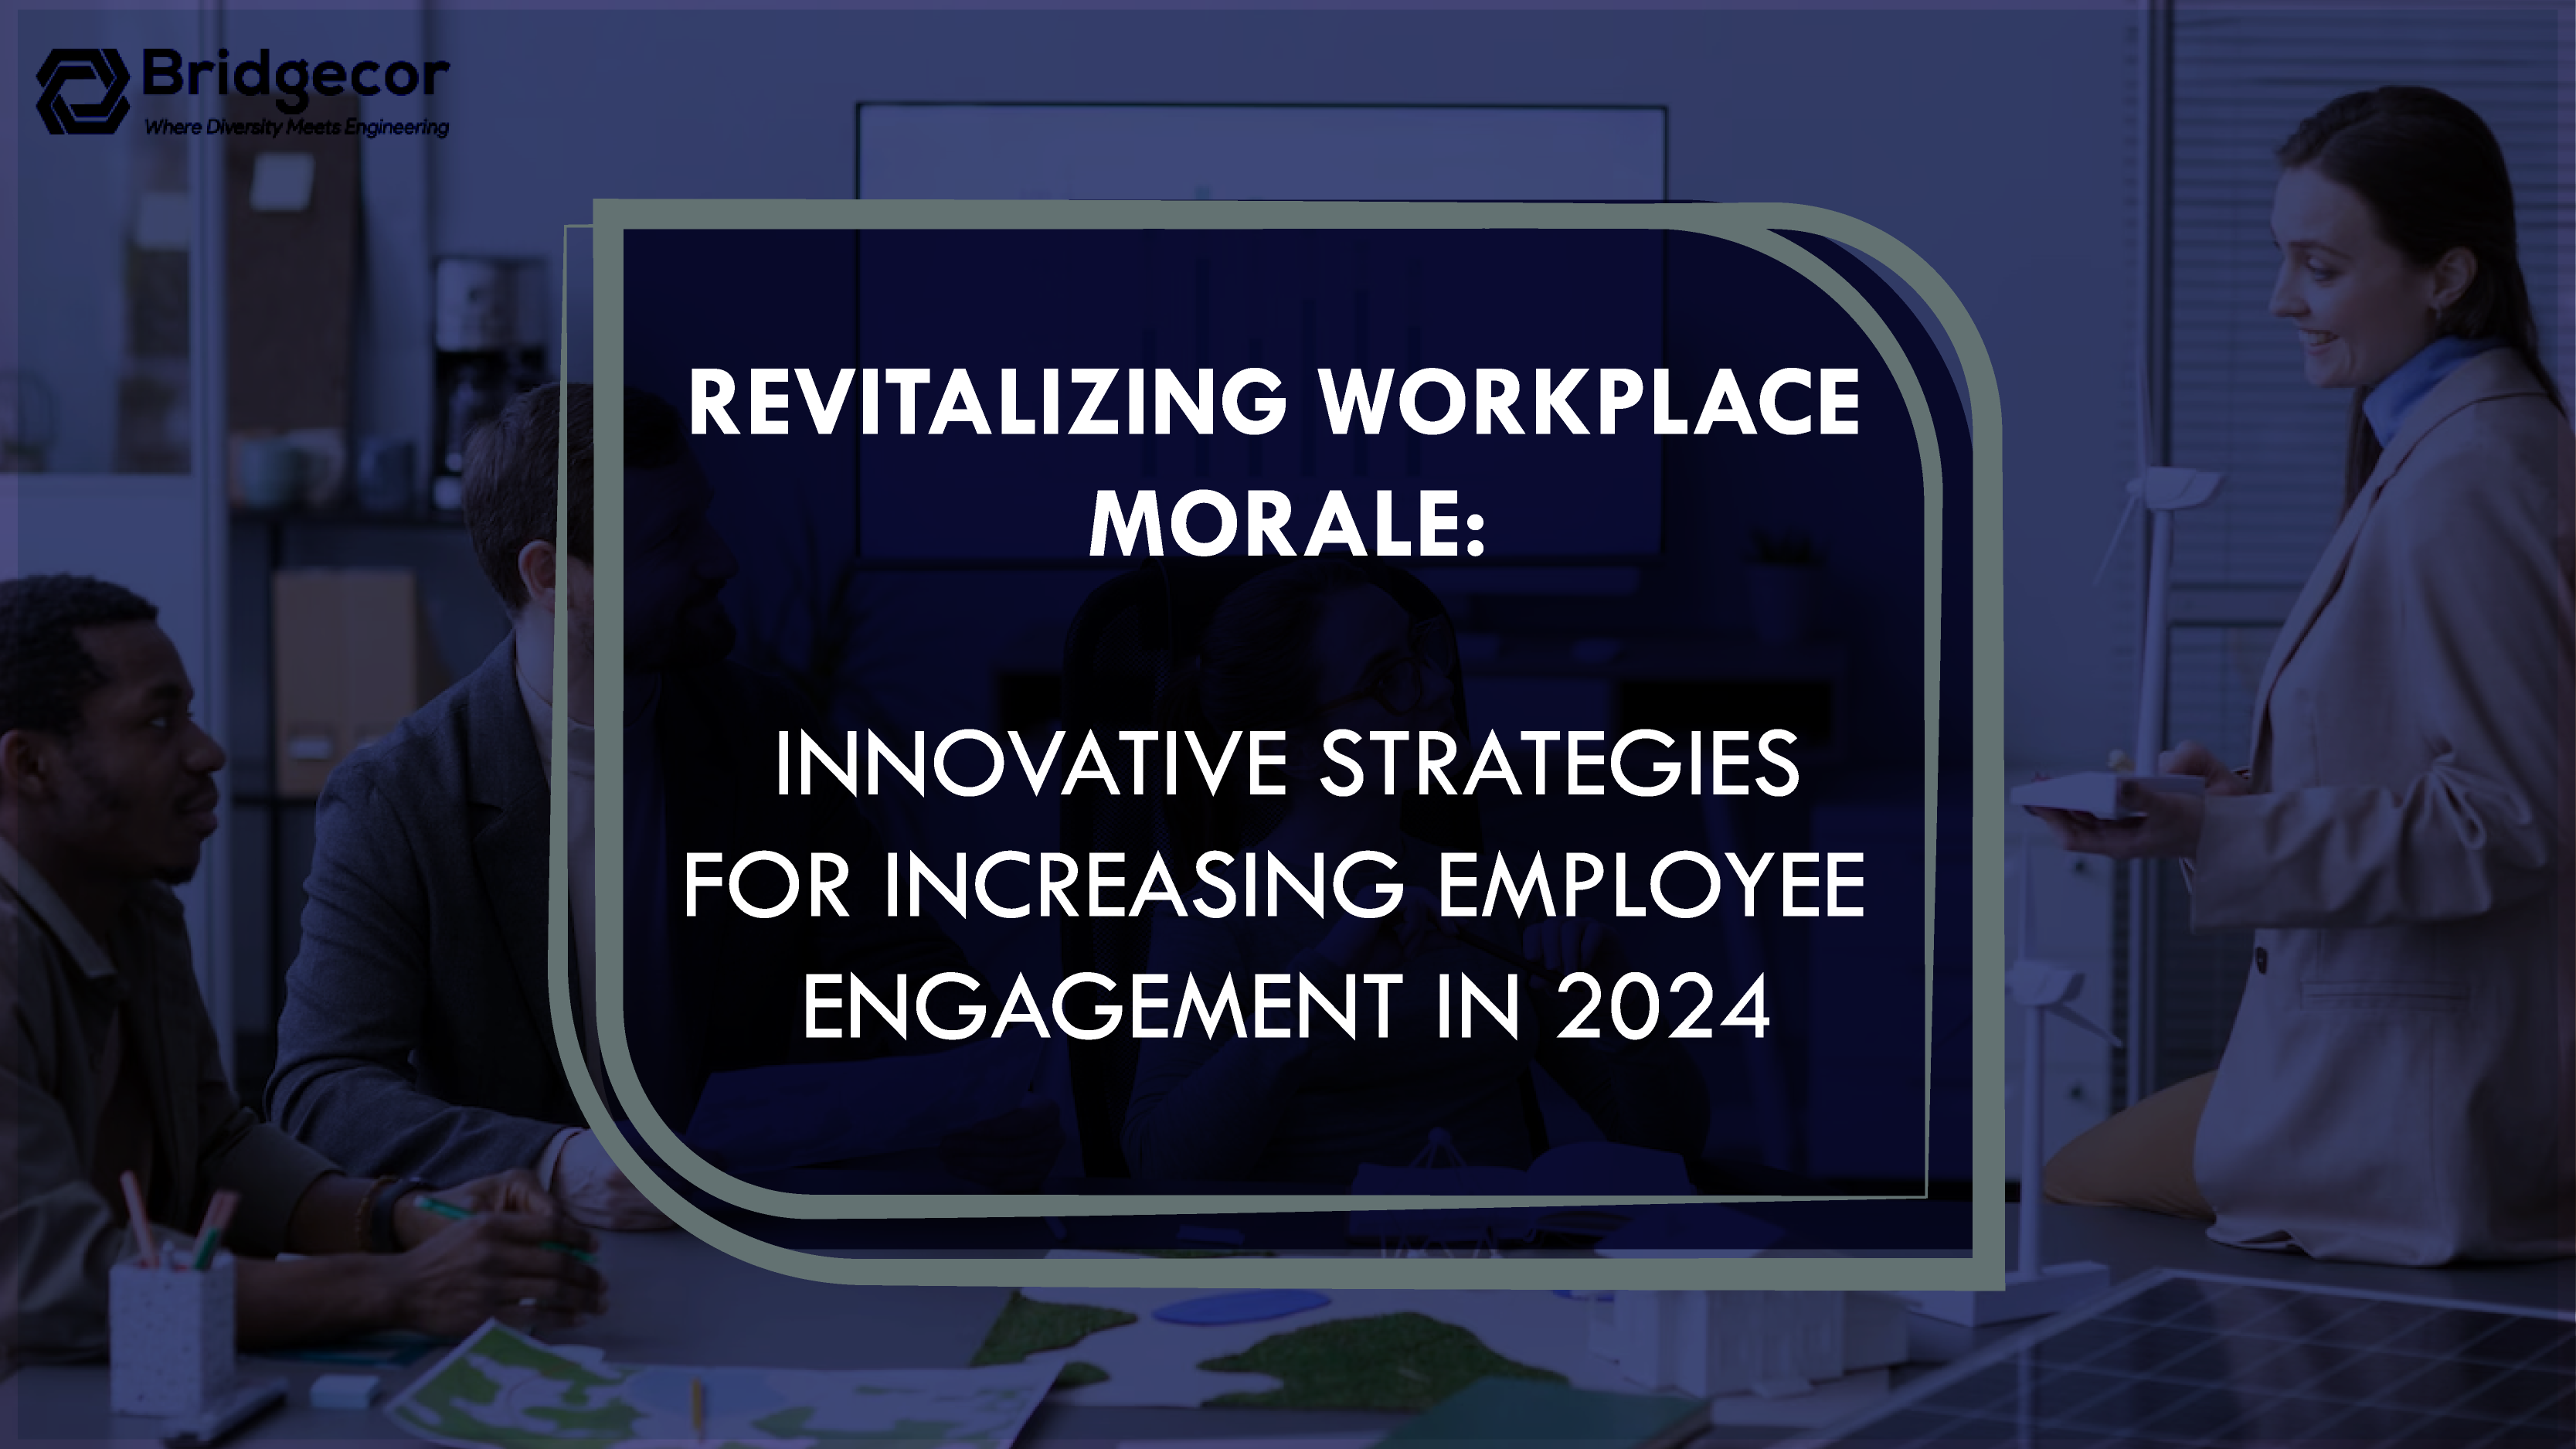 Revitalizing Workplace Morale: Innovative Strategies for Increasing Employee Engagement in 2024